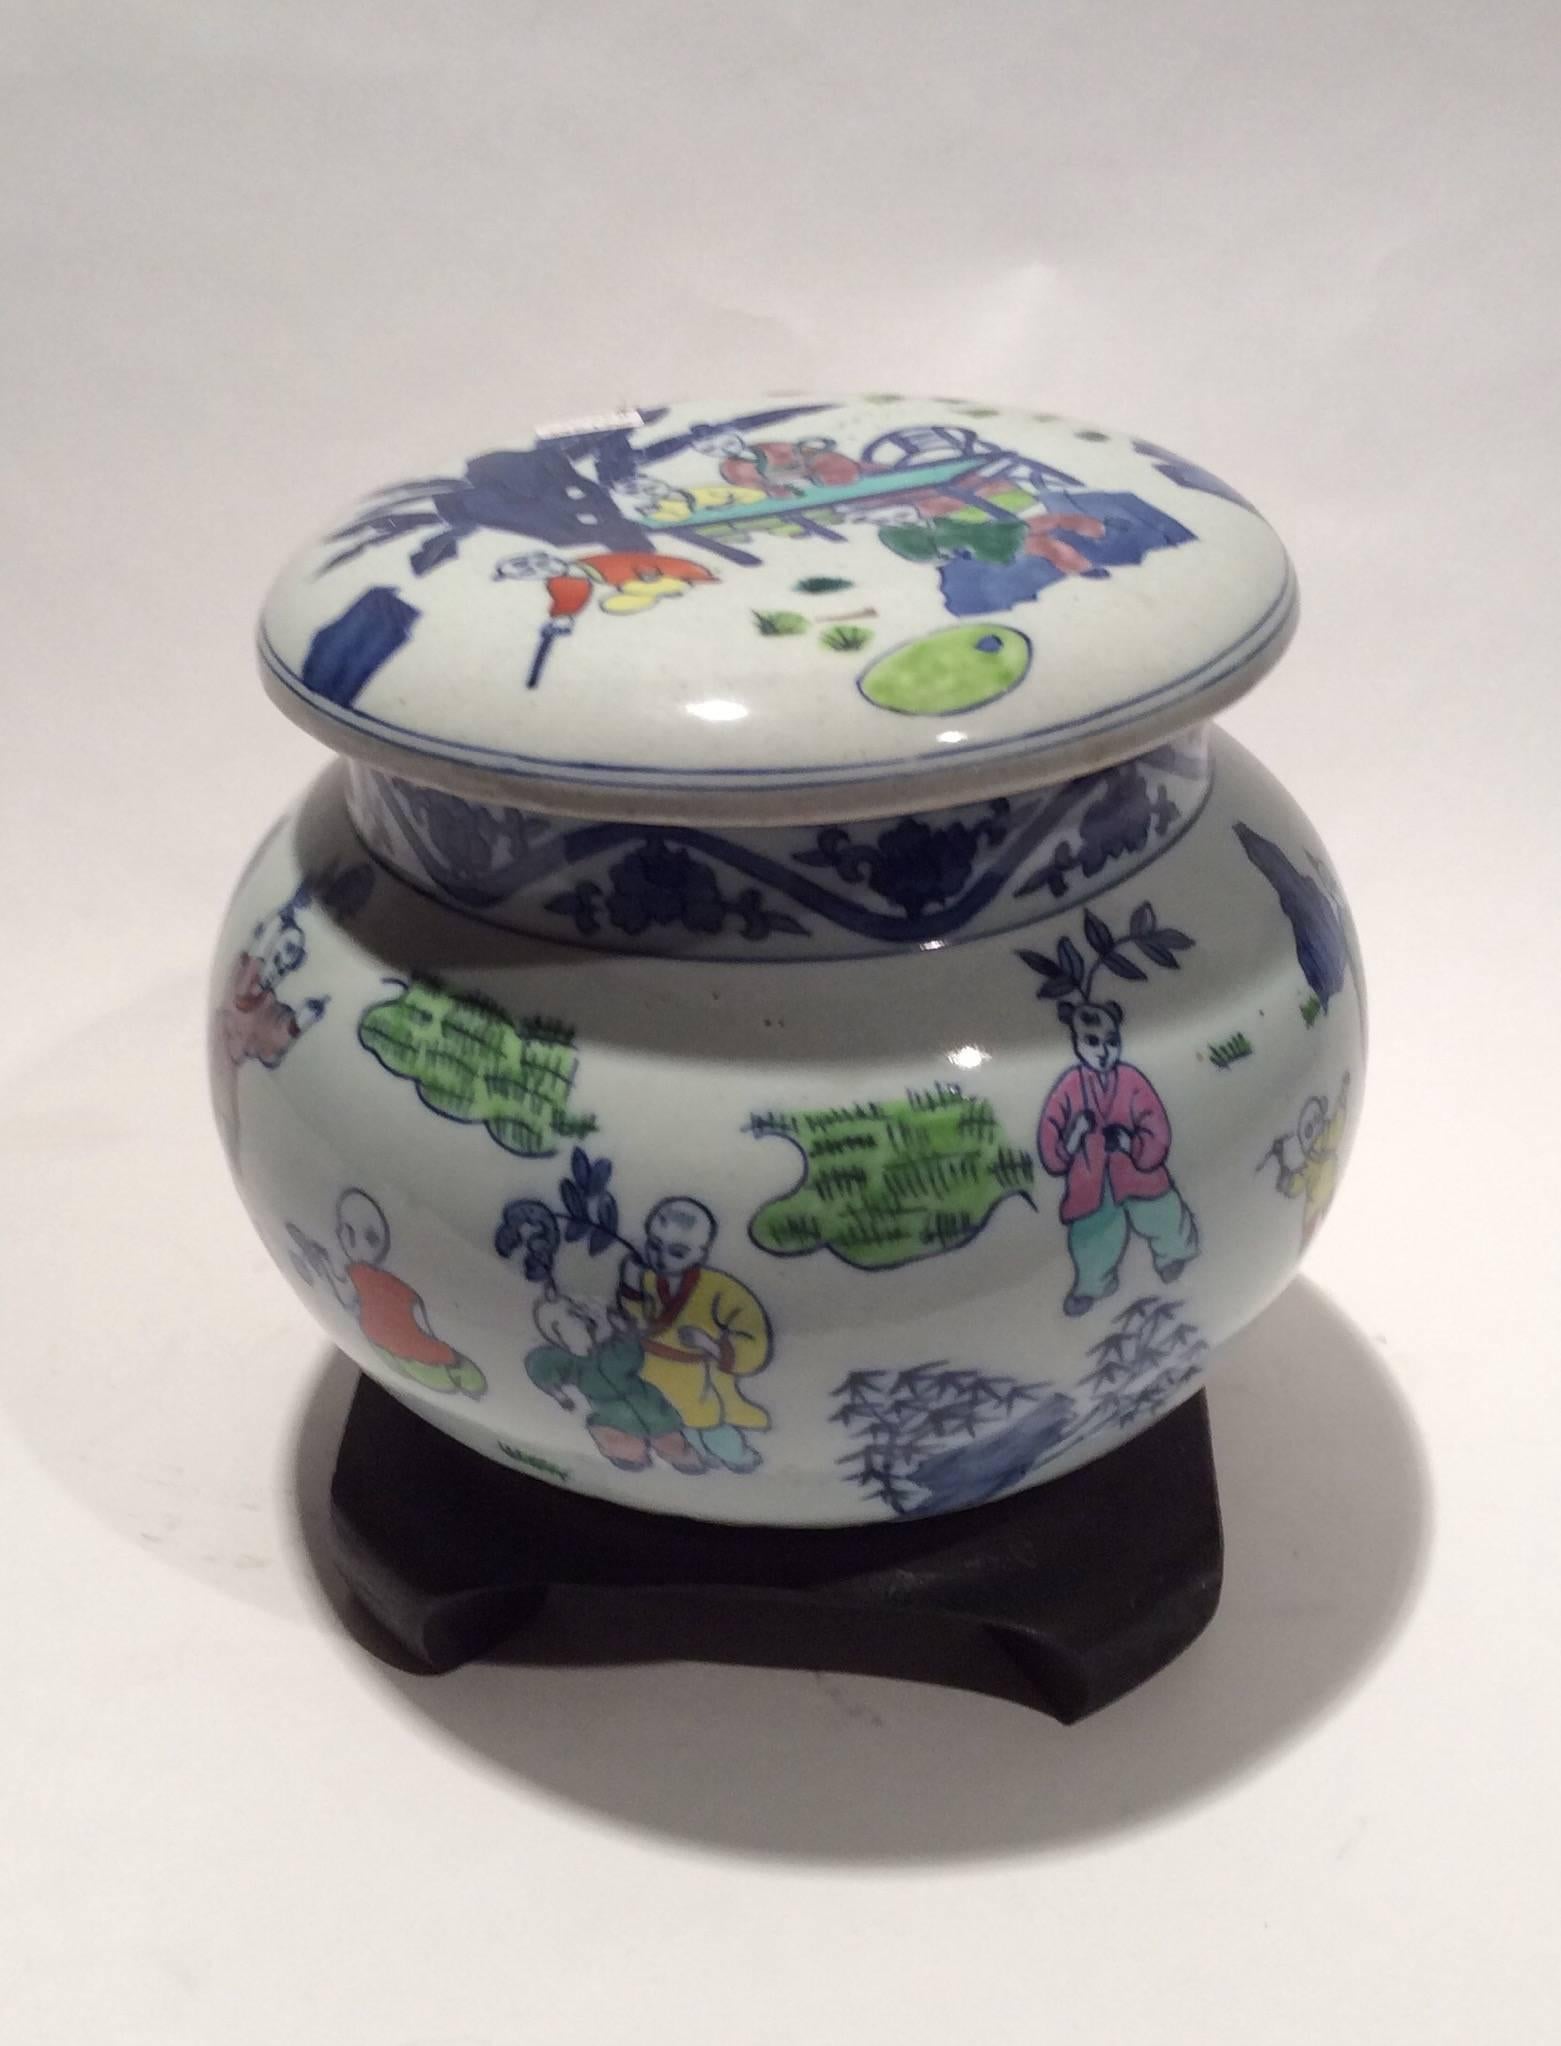 Five-color porcelain jar hand-painted with various scenes of children playing.